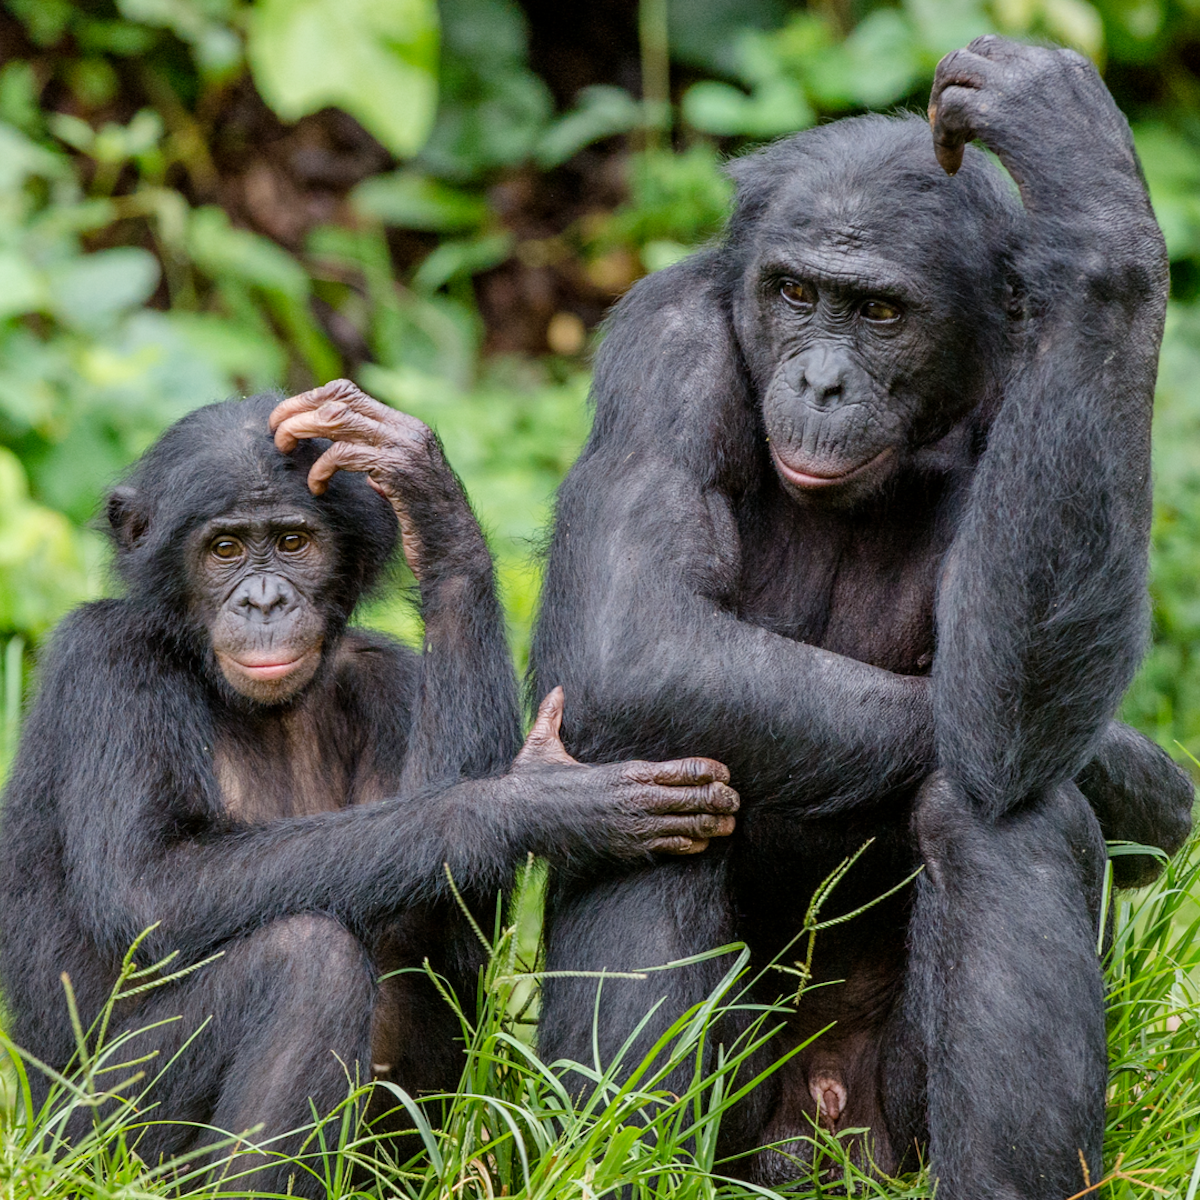 Curious Kids: Why do humans not have fur like chimpanzees and gorillas?